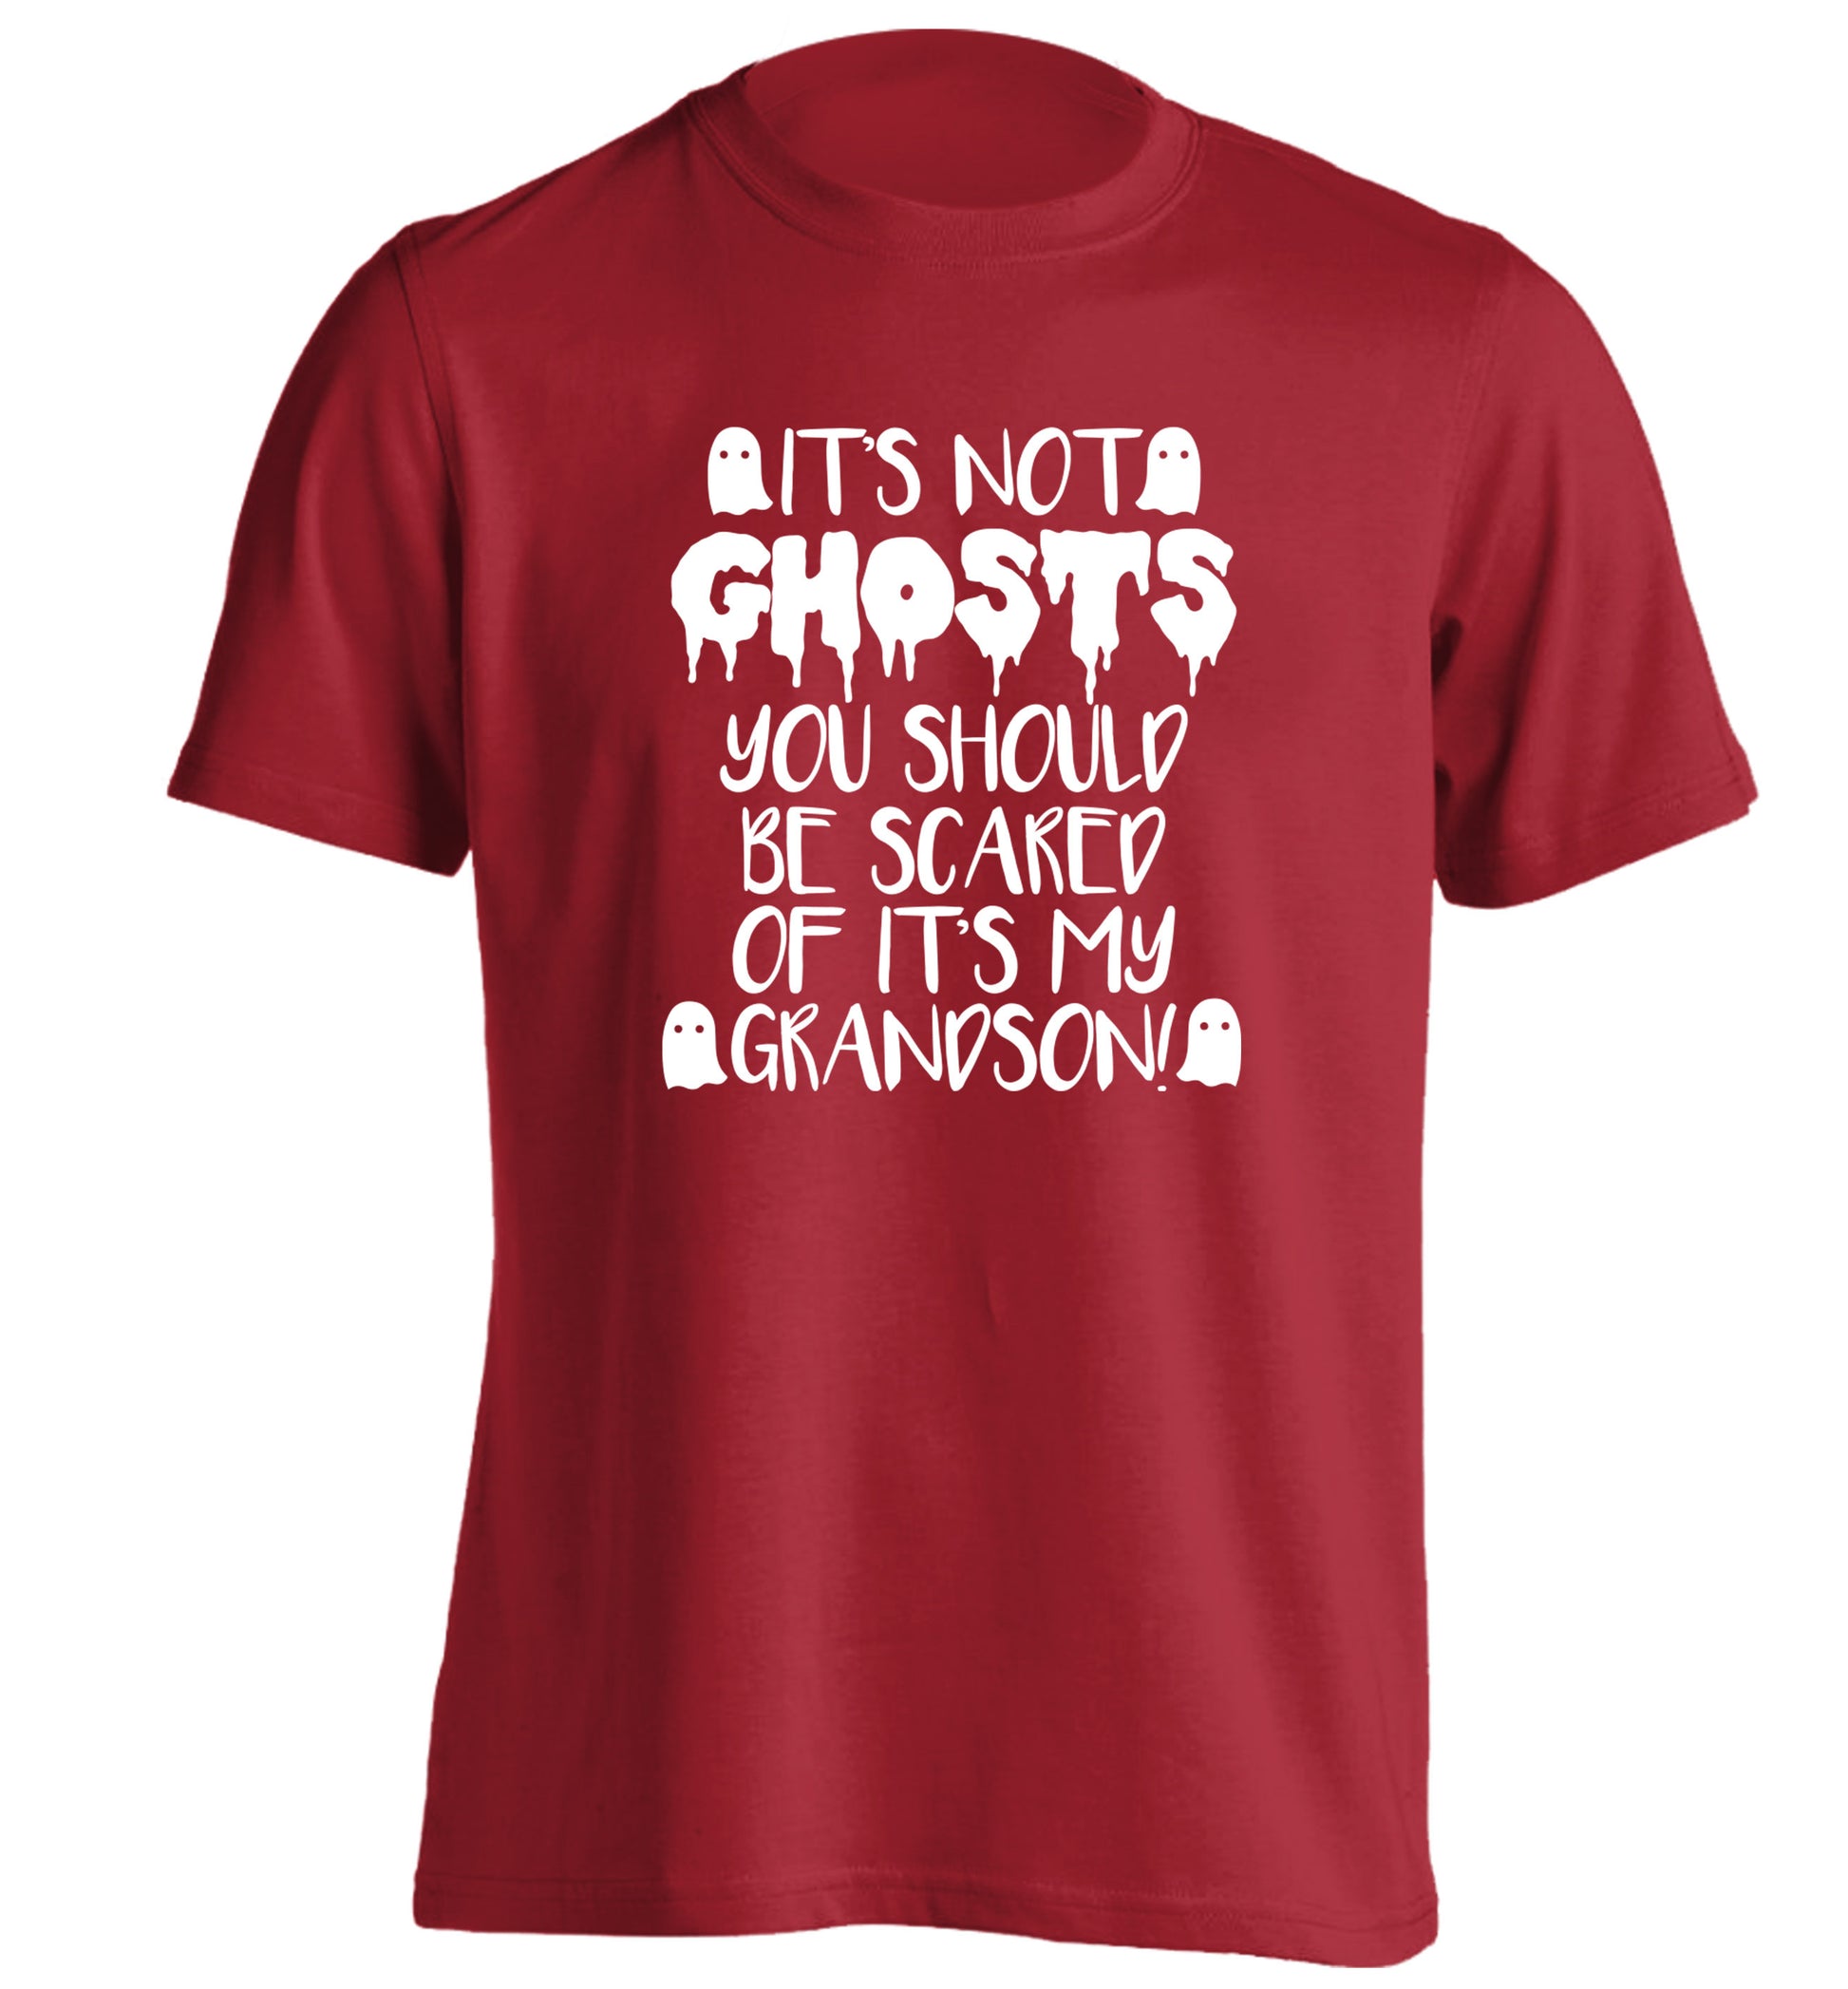 It's not ghosts you should be scared of it's my grandson! adults unisex red Tshirt 2XL